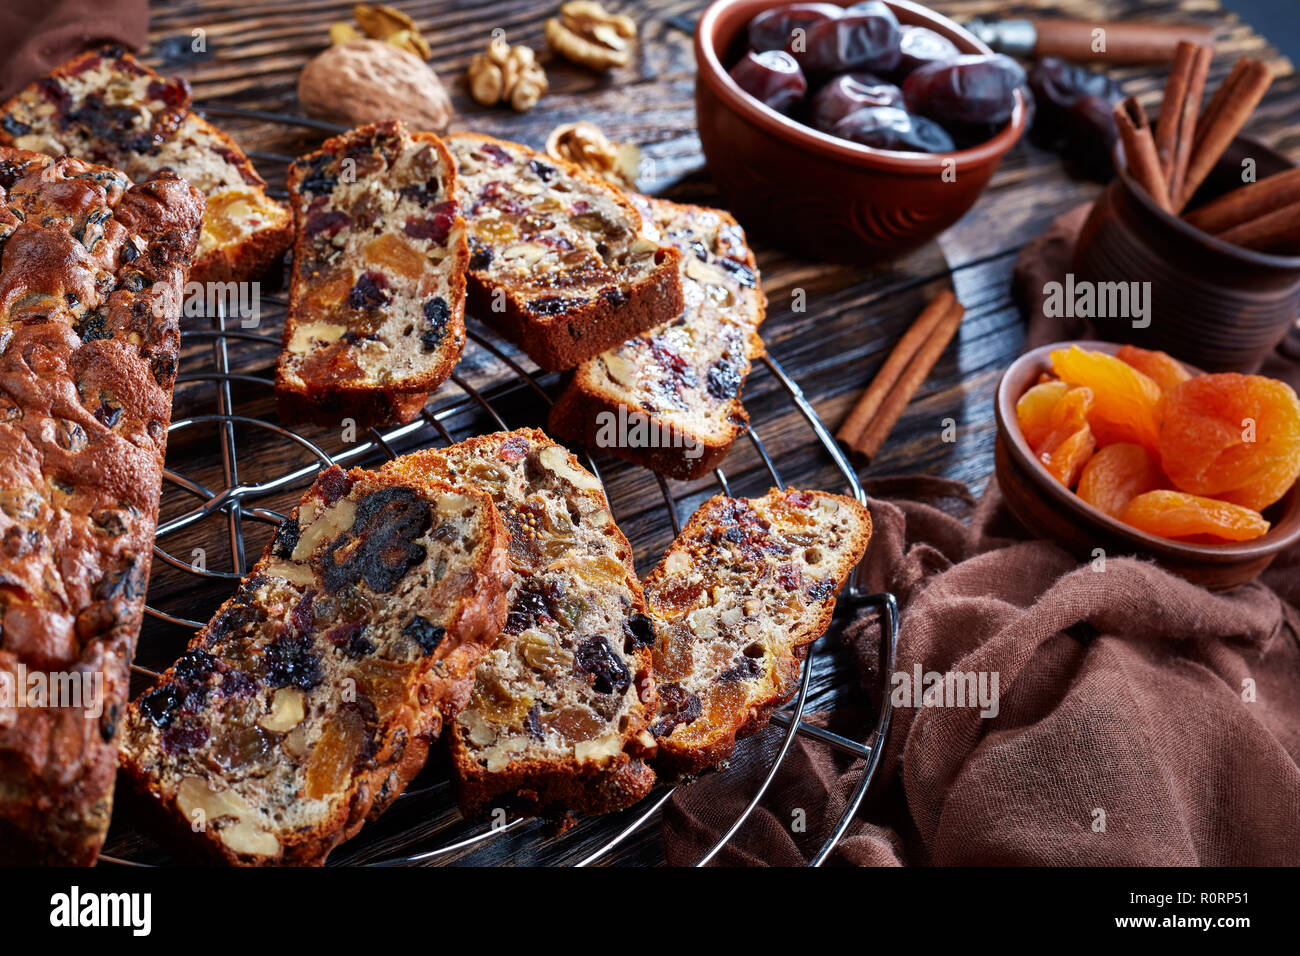 traditional dried fruits rich cake on a wire cake stand with brown cloth, cinnamon sticks, dried apricots and date fruits on a rustic wooden table, vi Stock Photo